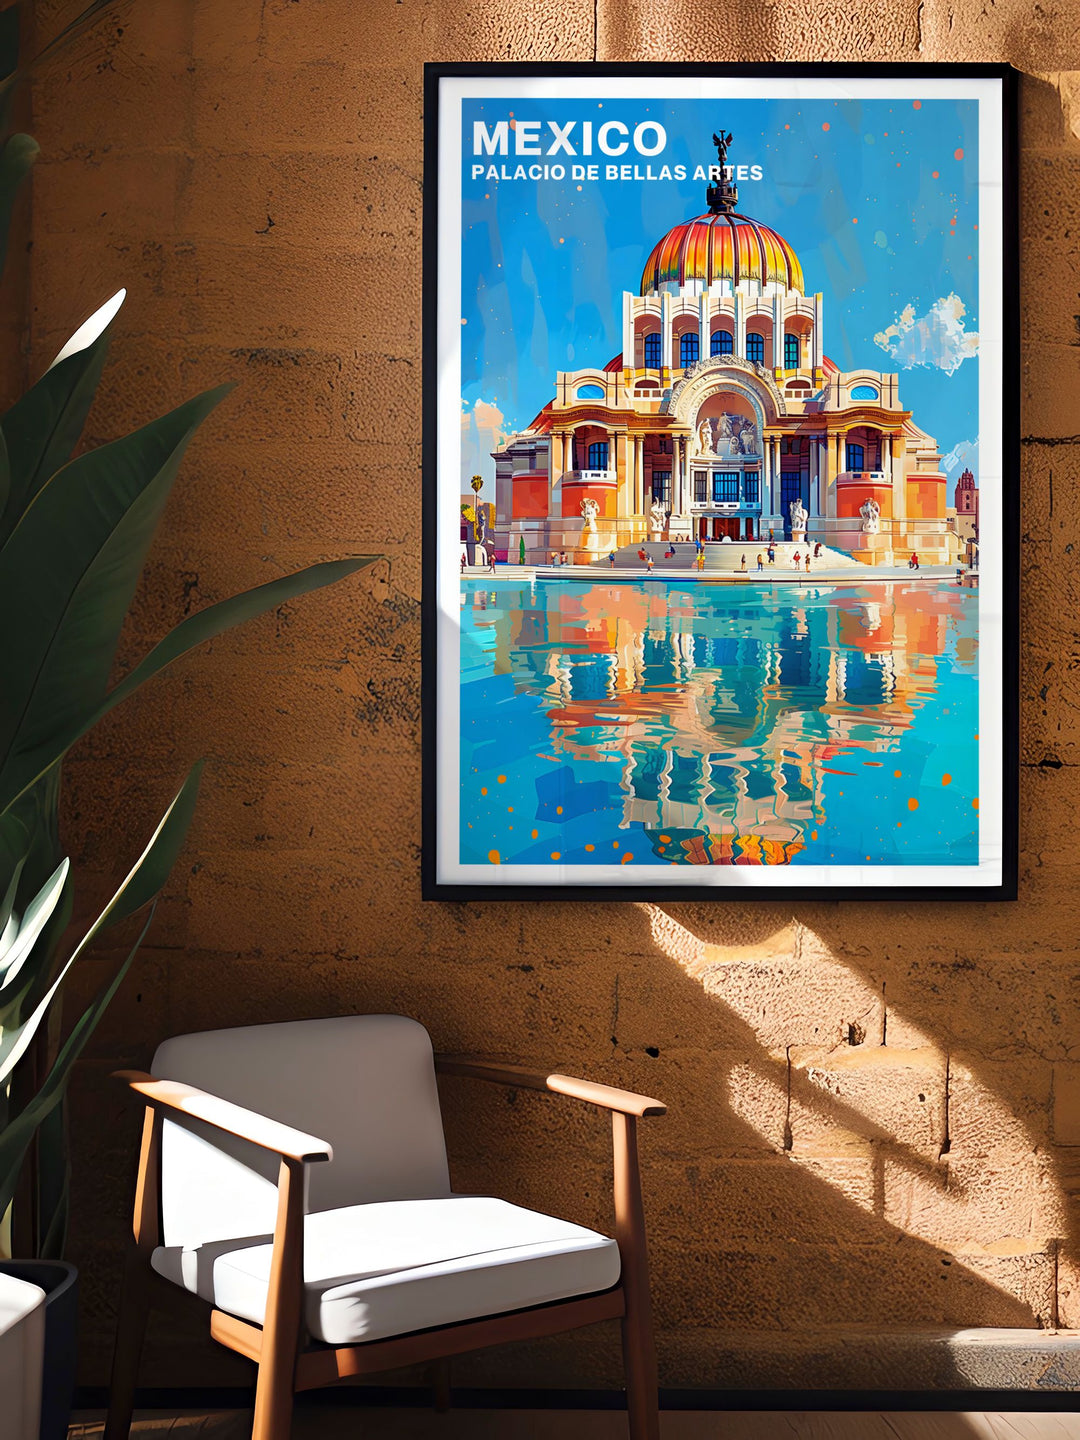 Transform your space with this Palacio de Bellas Artes travel poster. Ideal for adding a touch of Mexican heritage to your decor. This print captures the beauty of Palacio de Bellas Artes and is perfect for Mexico wall art enthusiasts and art lovers.